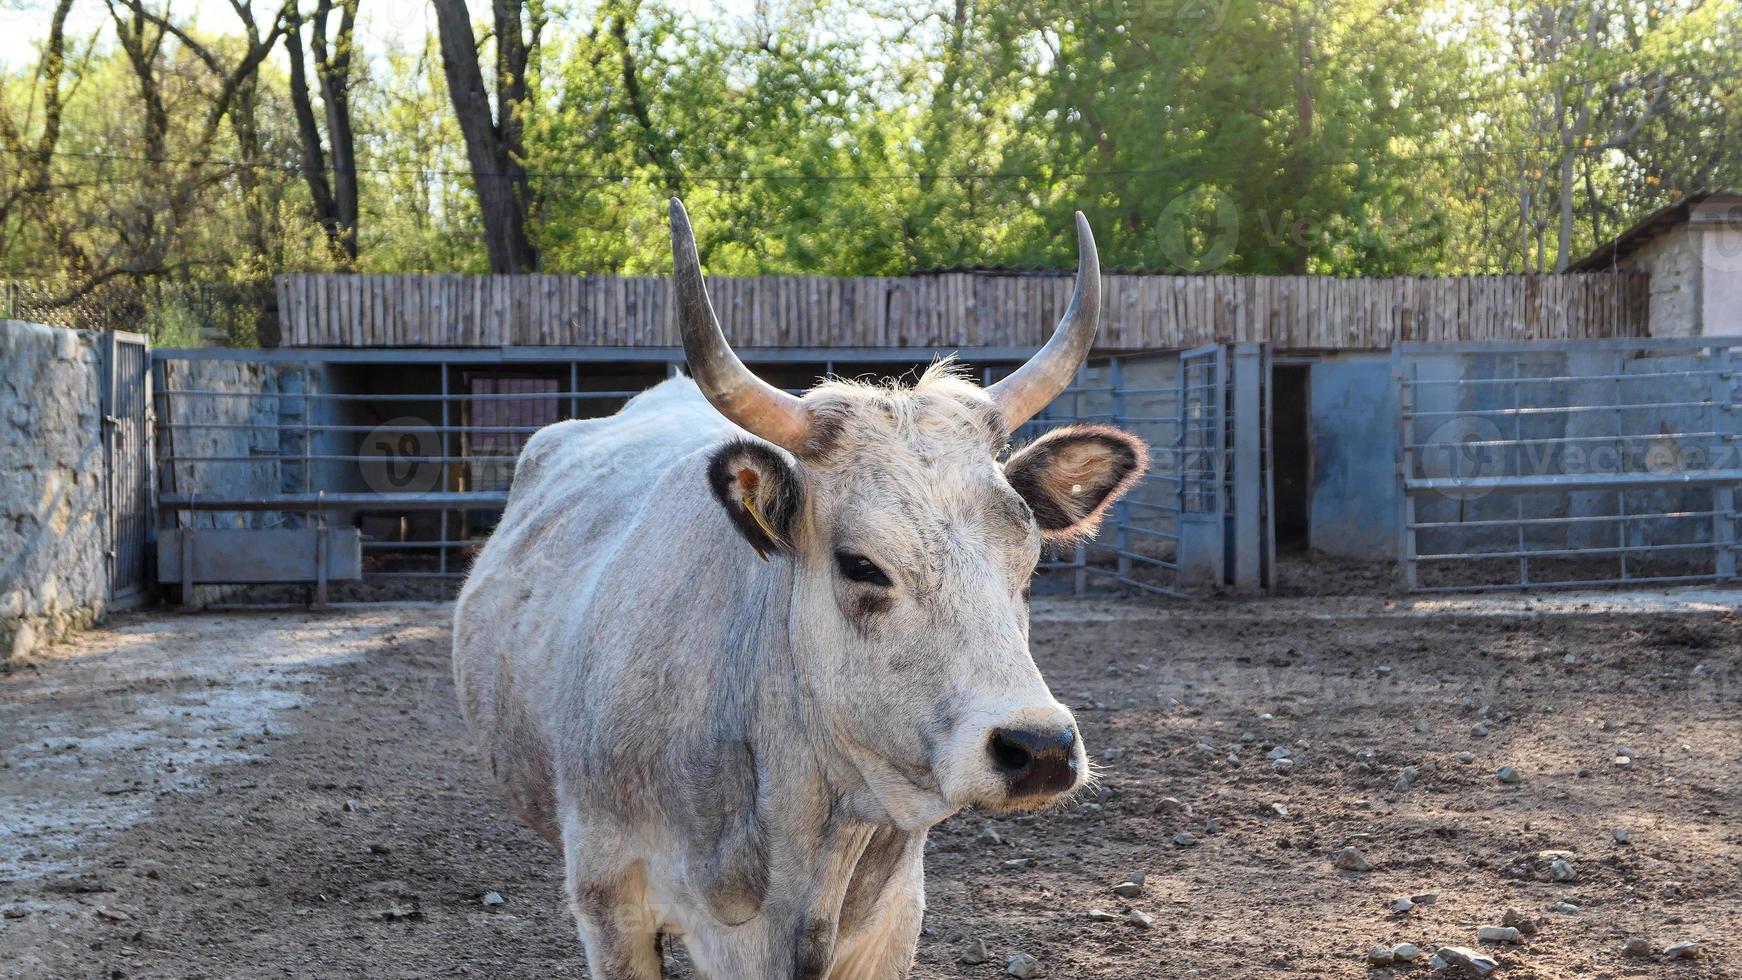 Beautiful cow portrait in the zoo photo